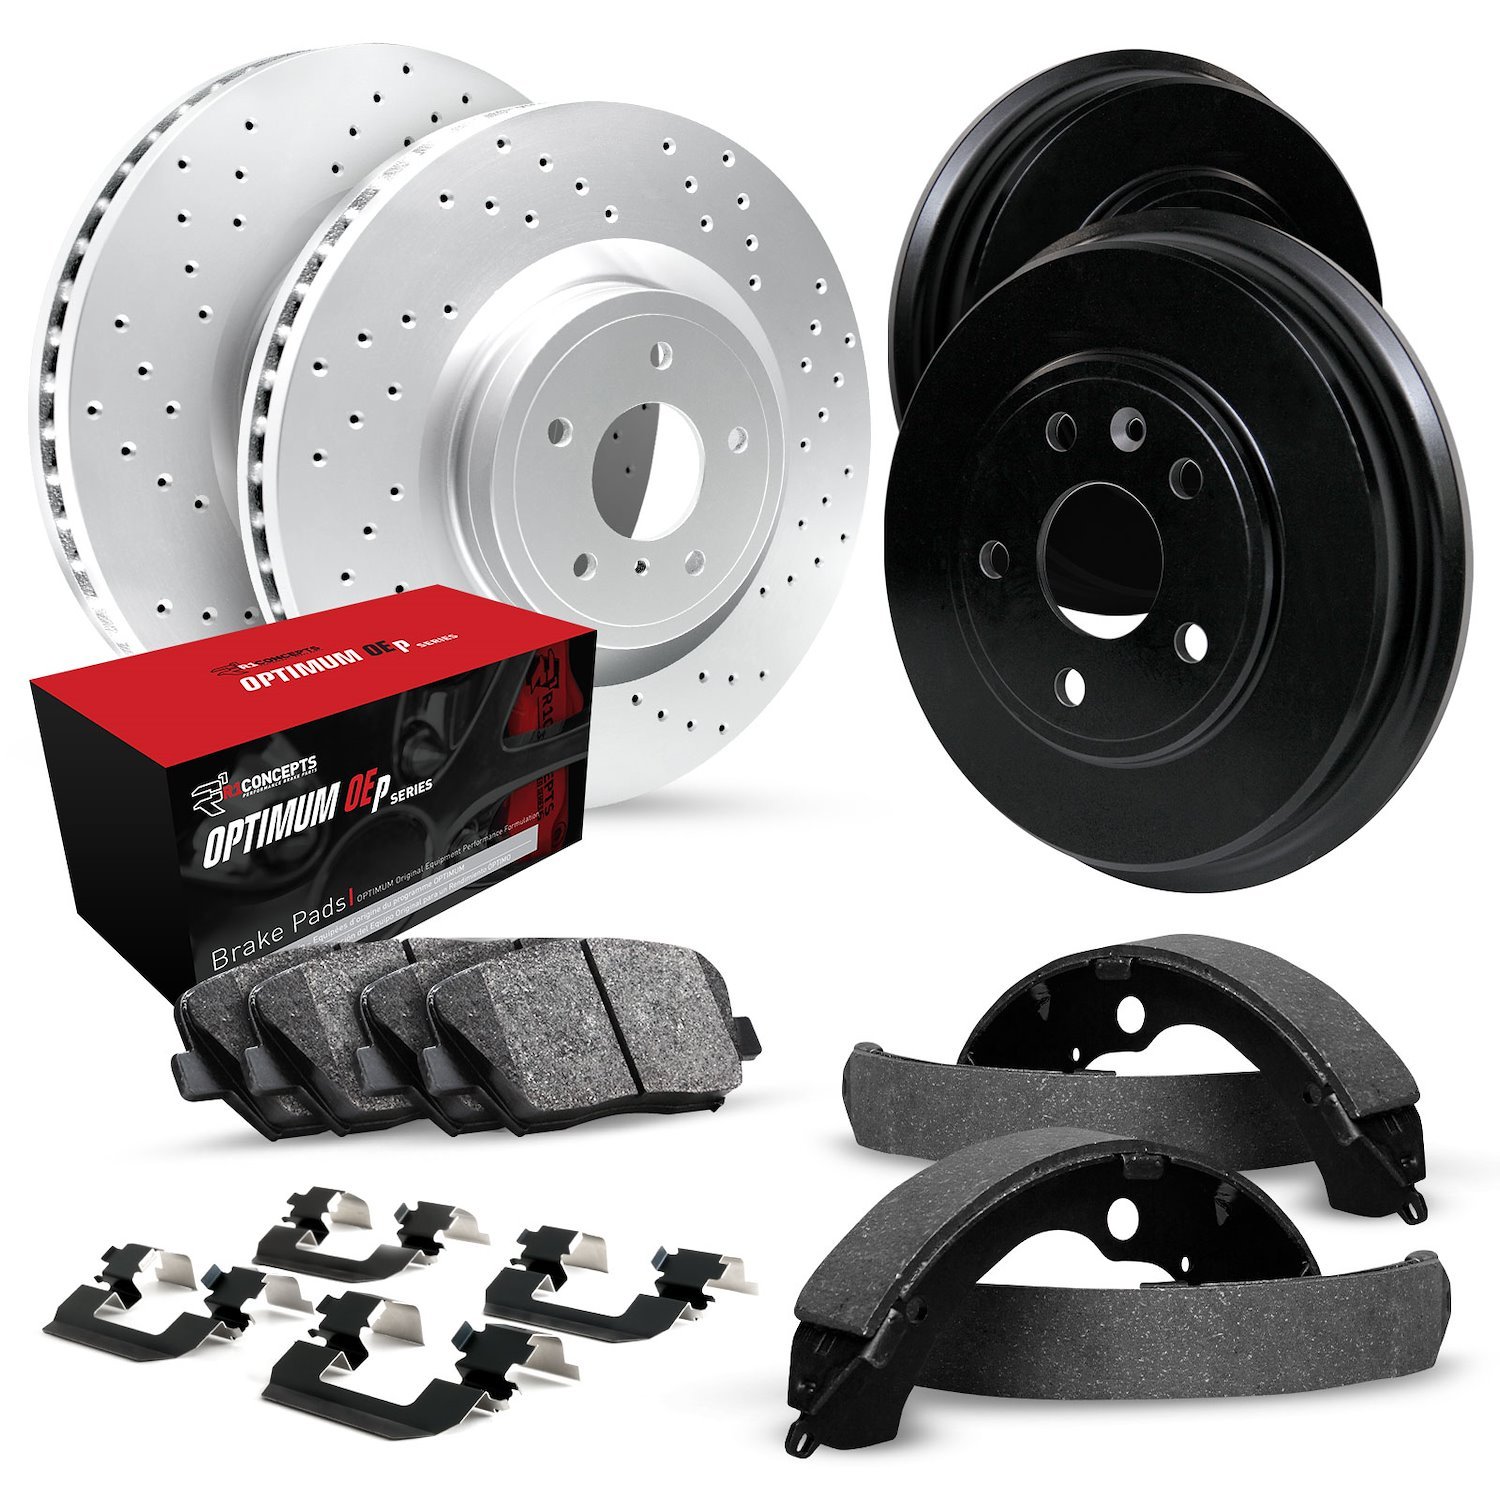 GEO-Carbon Drilled Brake Rotor & Drum Set w/Optimum OE Pads, Shoes, & Hardware, 1990-1991 Acura/Honda, Position: Front & Rear